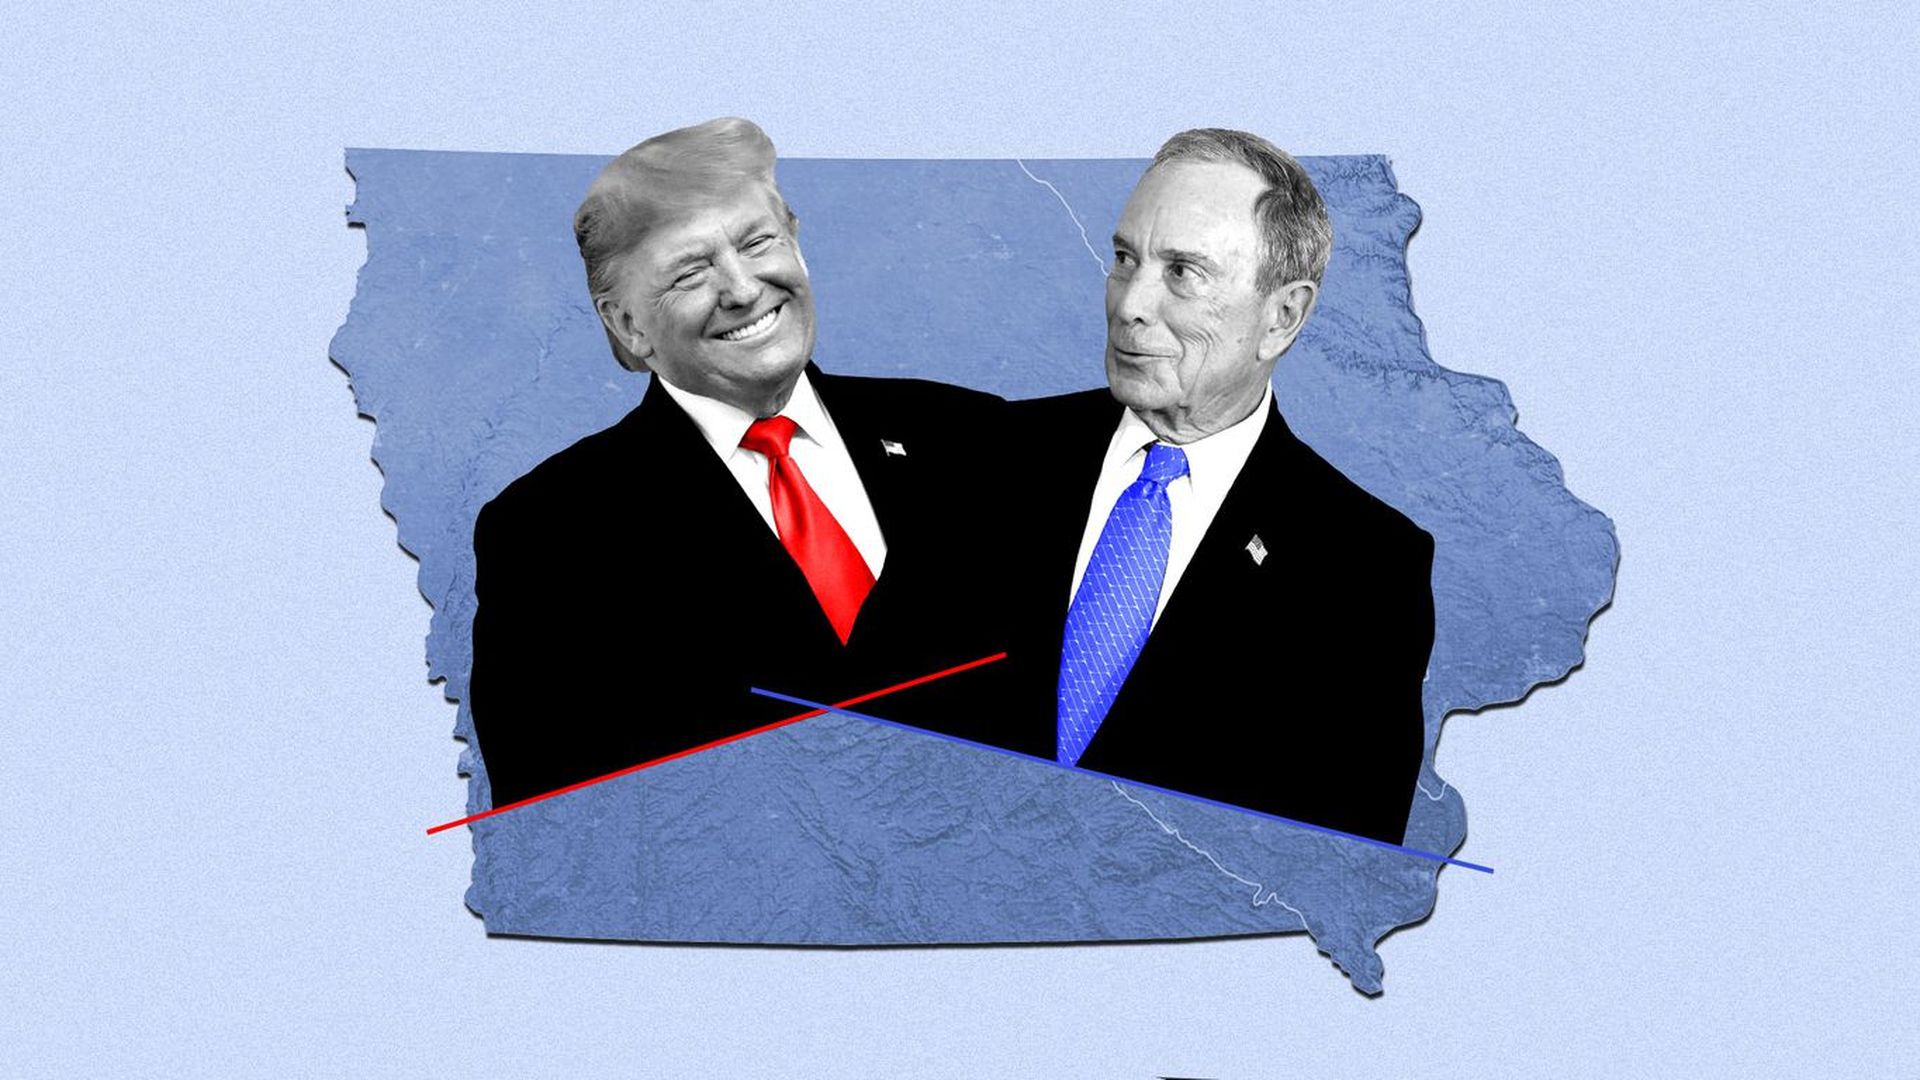  Donald Trump and Michael Bloomberg